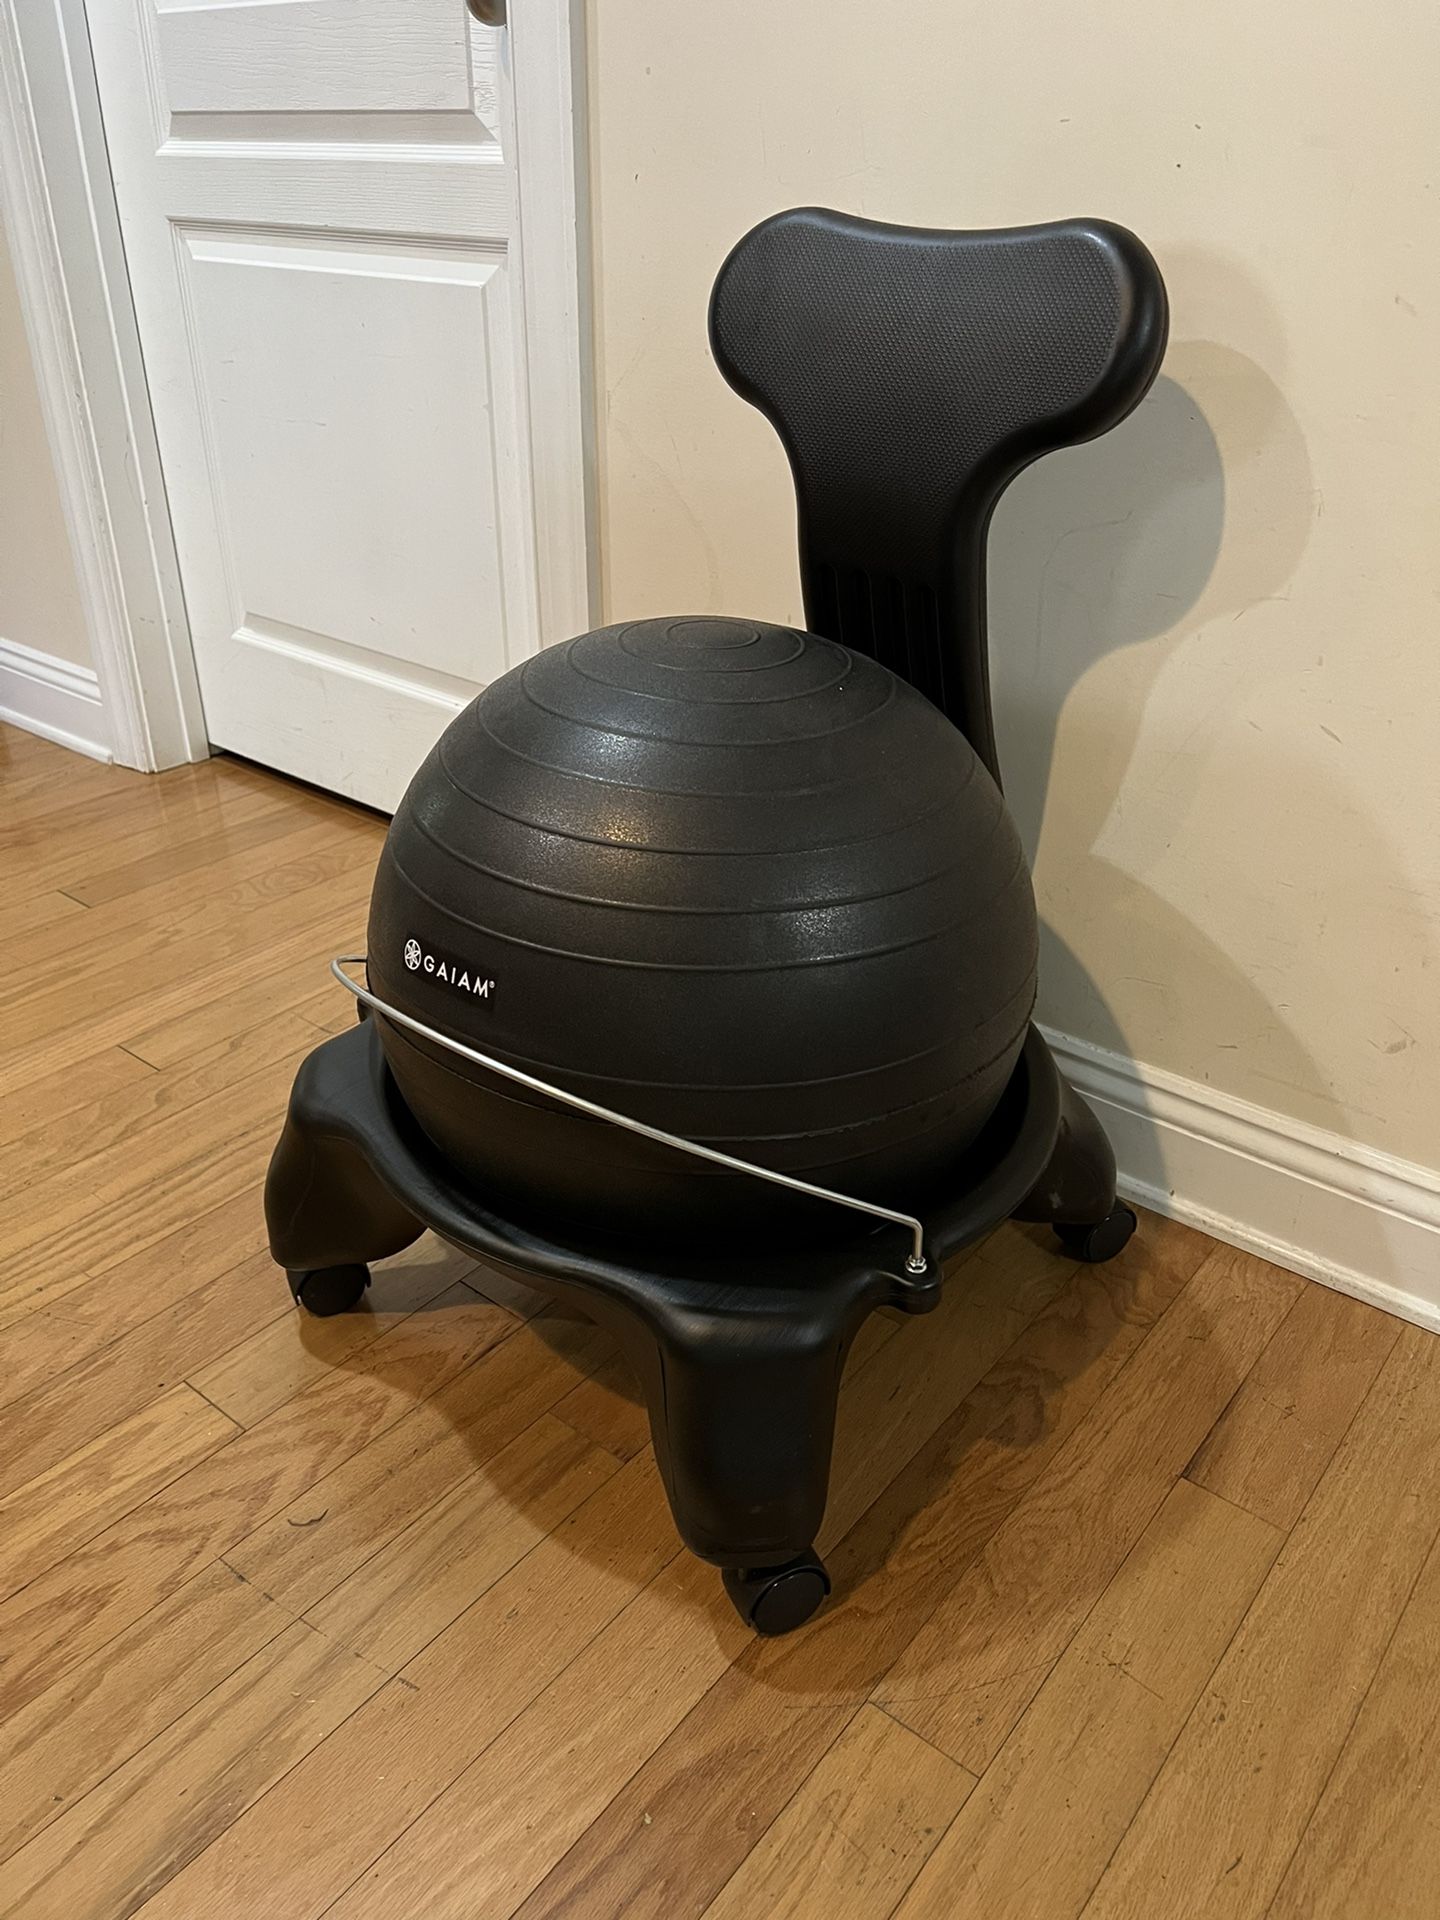 GAIAM Classic Balance Ball Chair with Base – Exercise Yoga Premium Ergonomic Chair (Excellent condition)